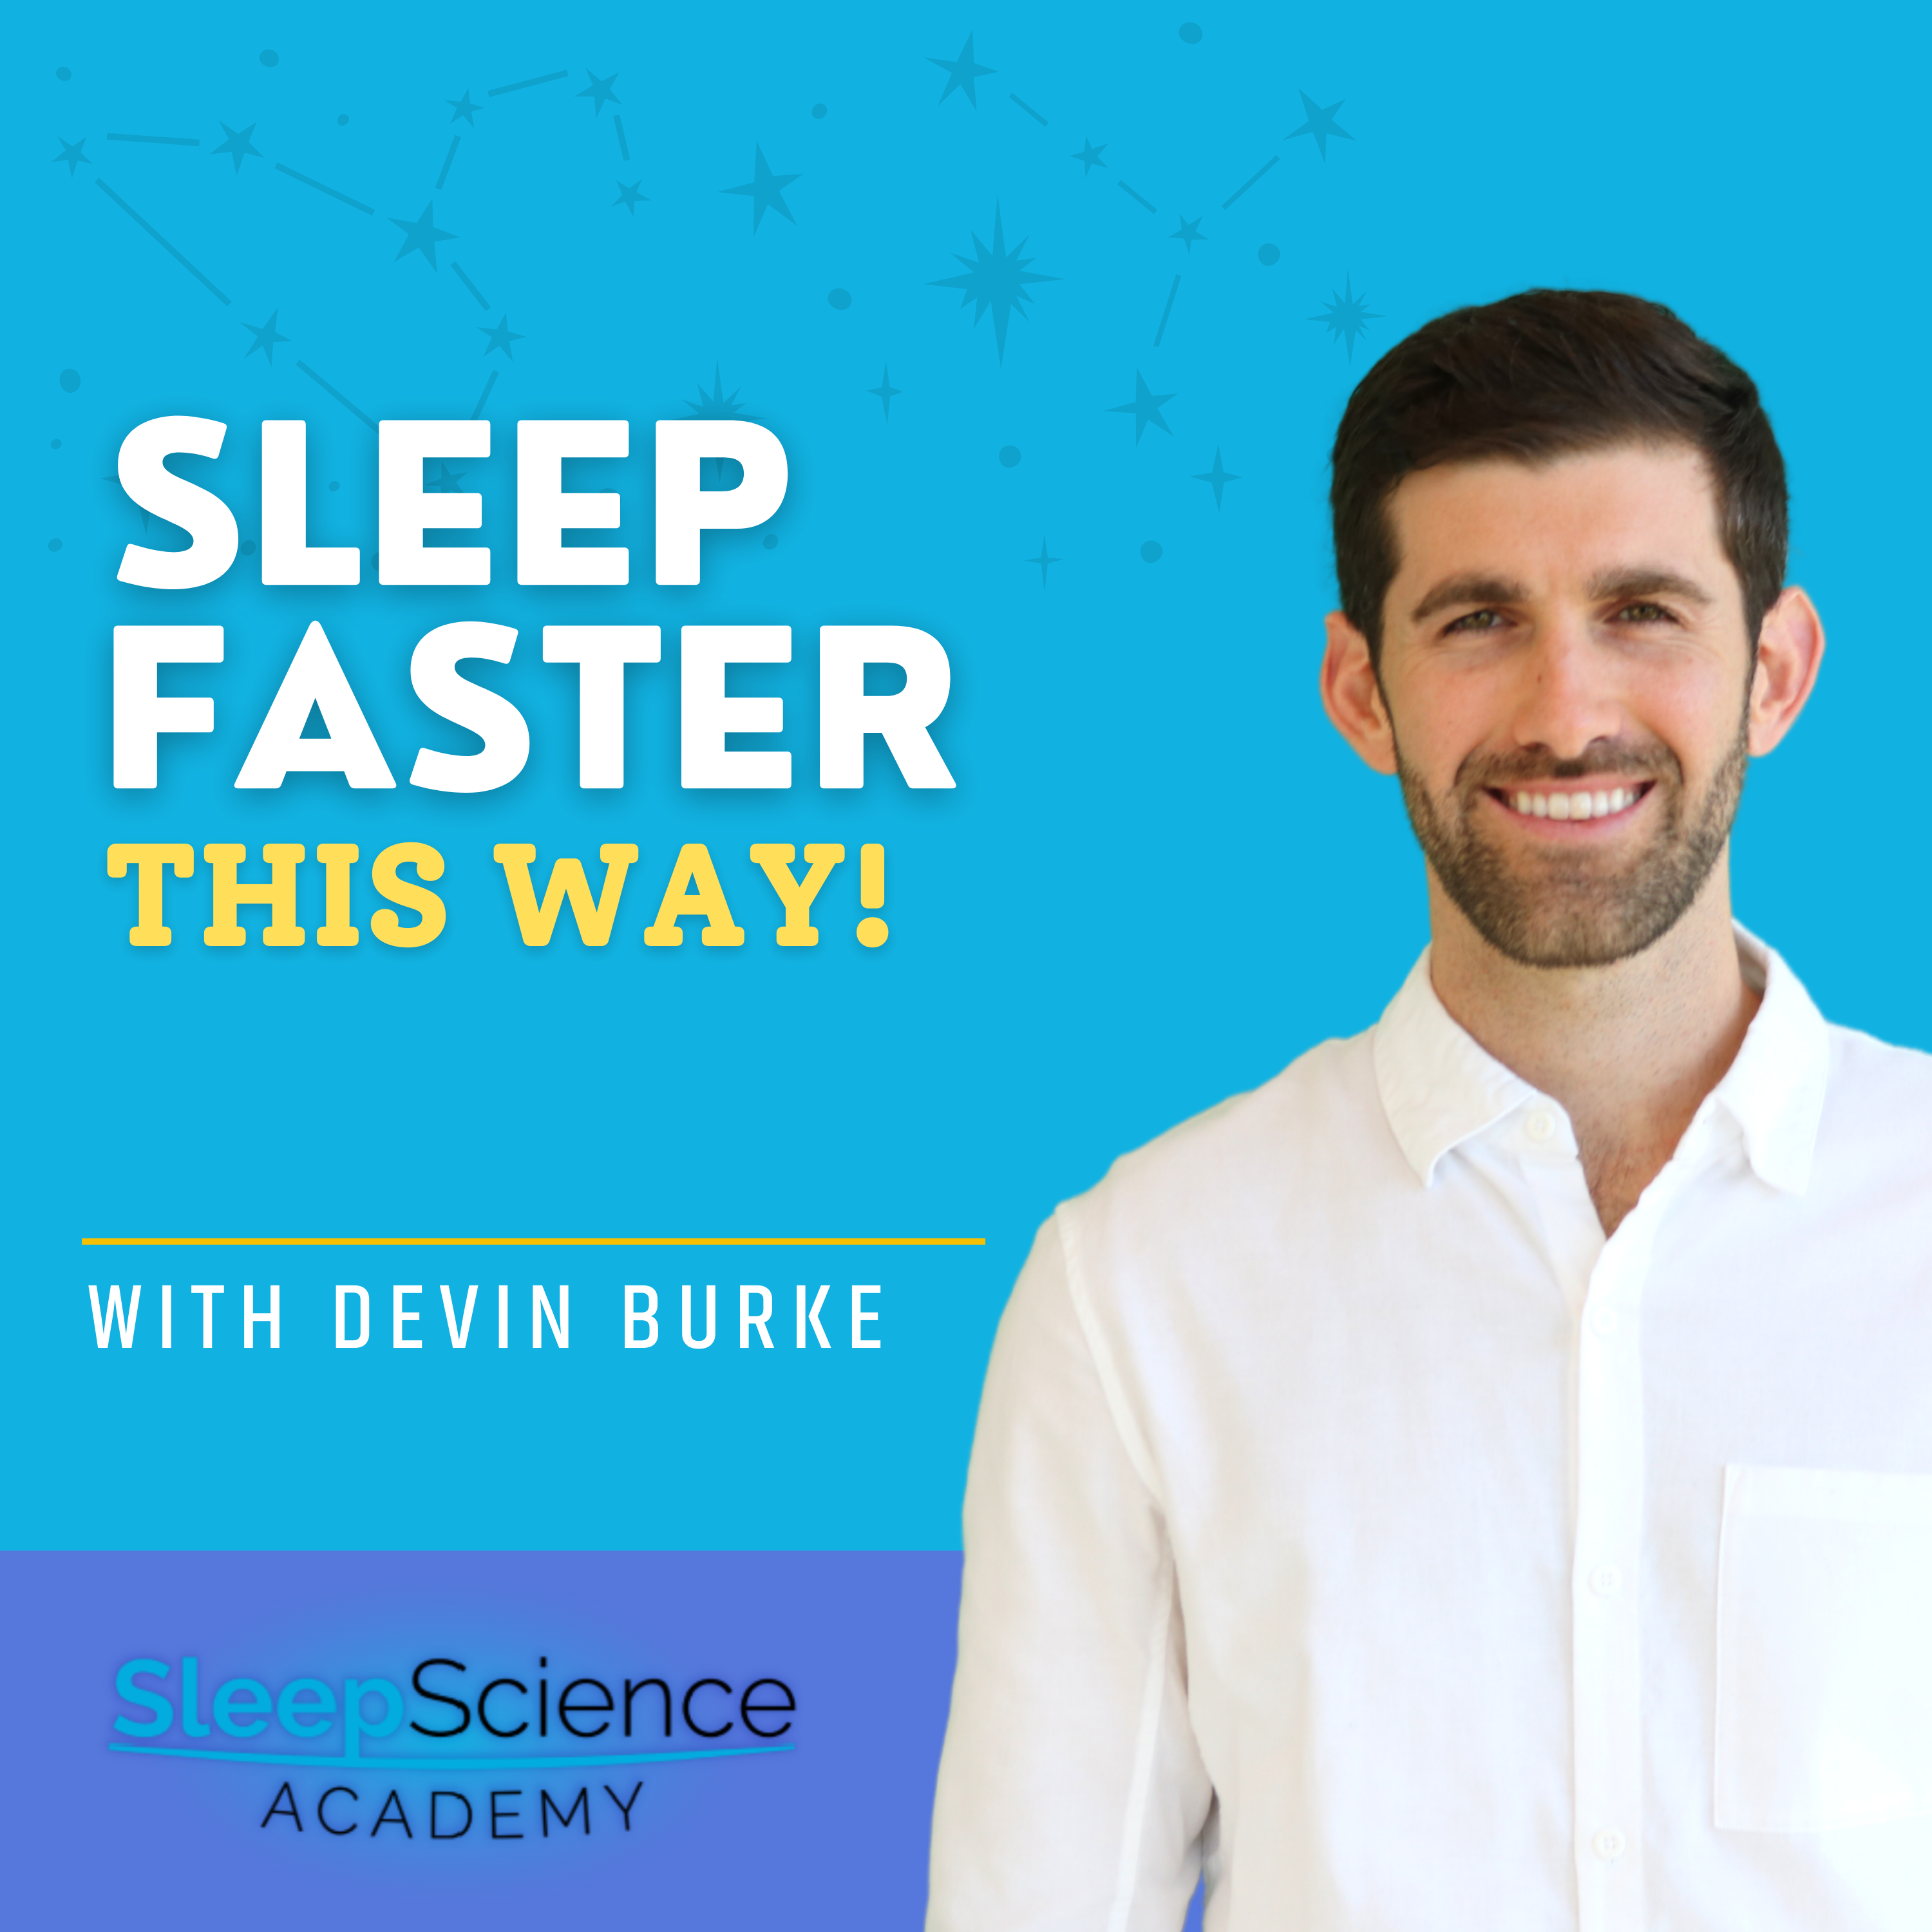 Train your Brain to Fall and Stay Asleep For Life